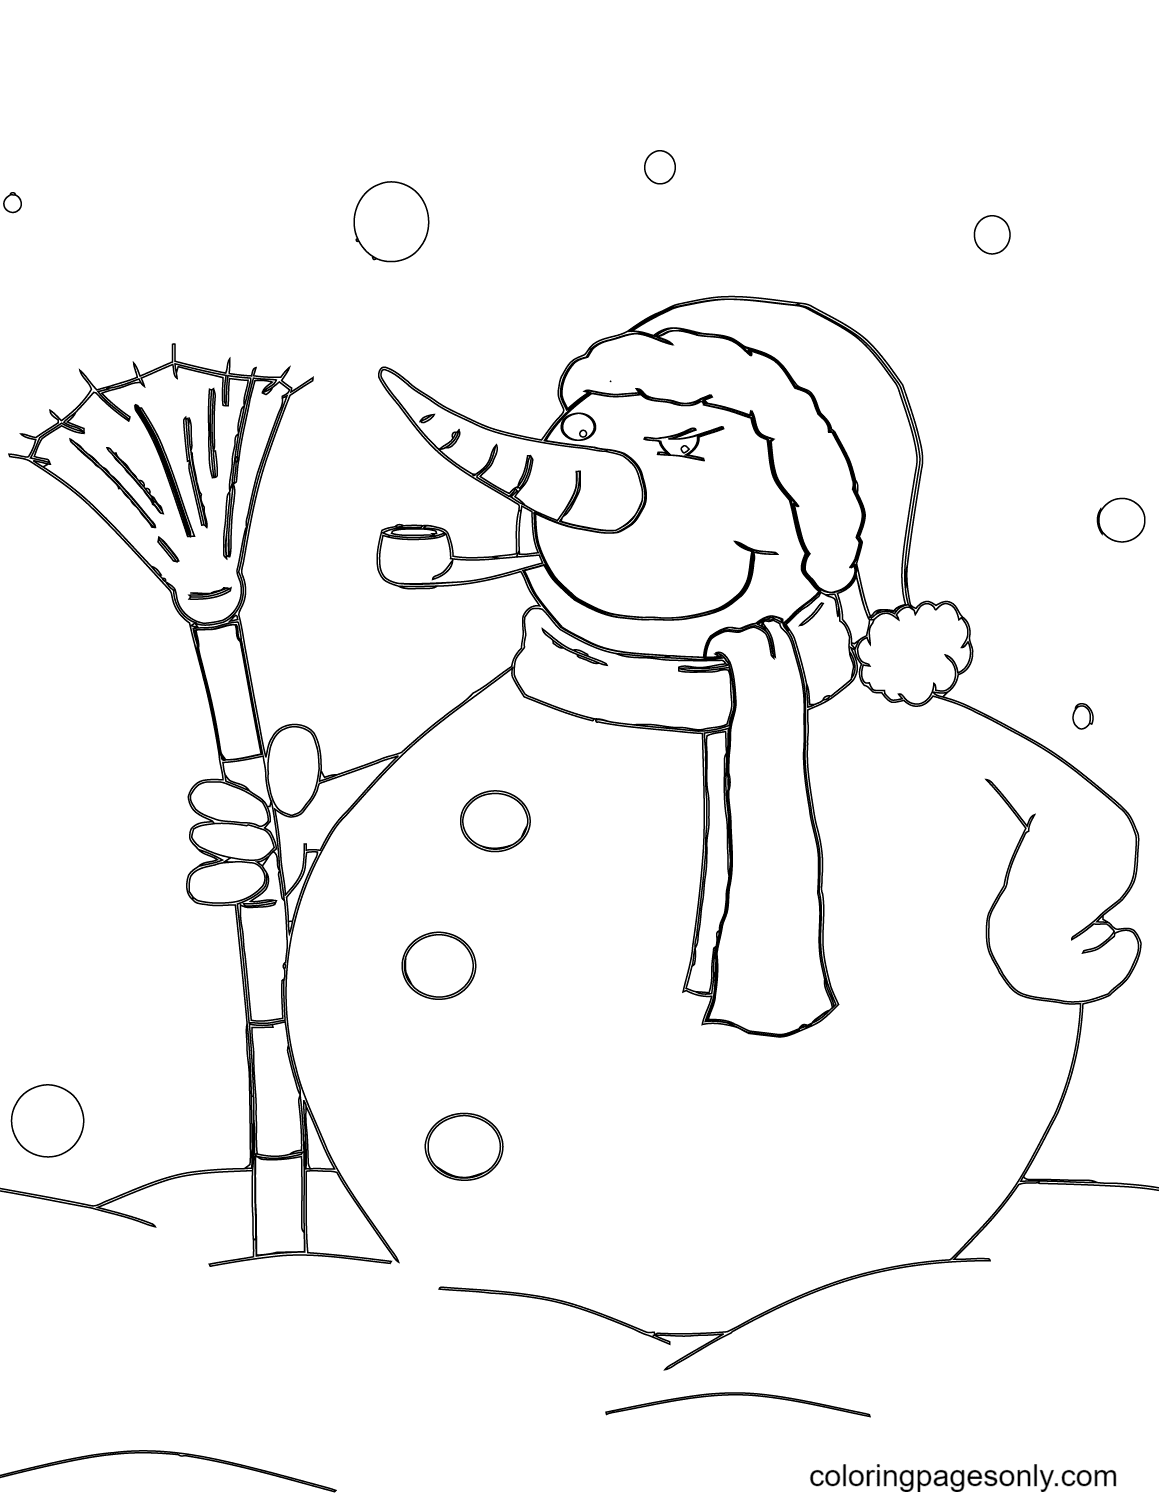 Snowman with Pipe and Broom Coloring Pages